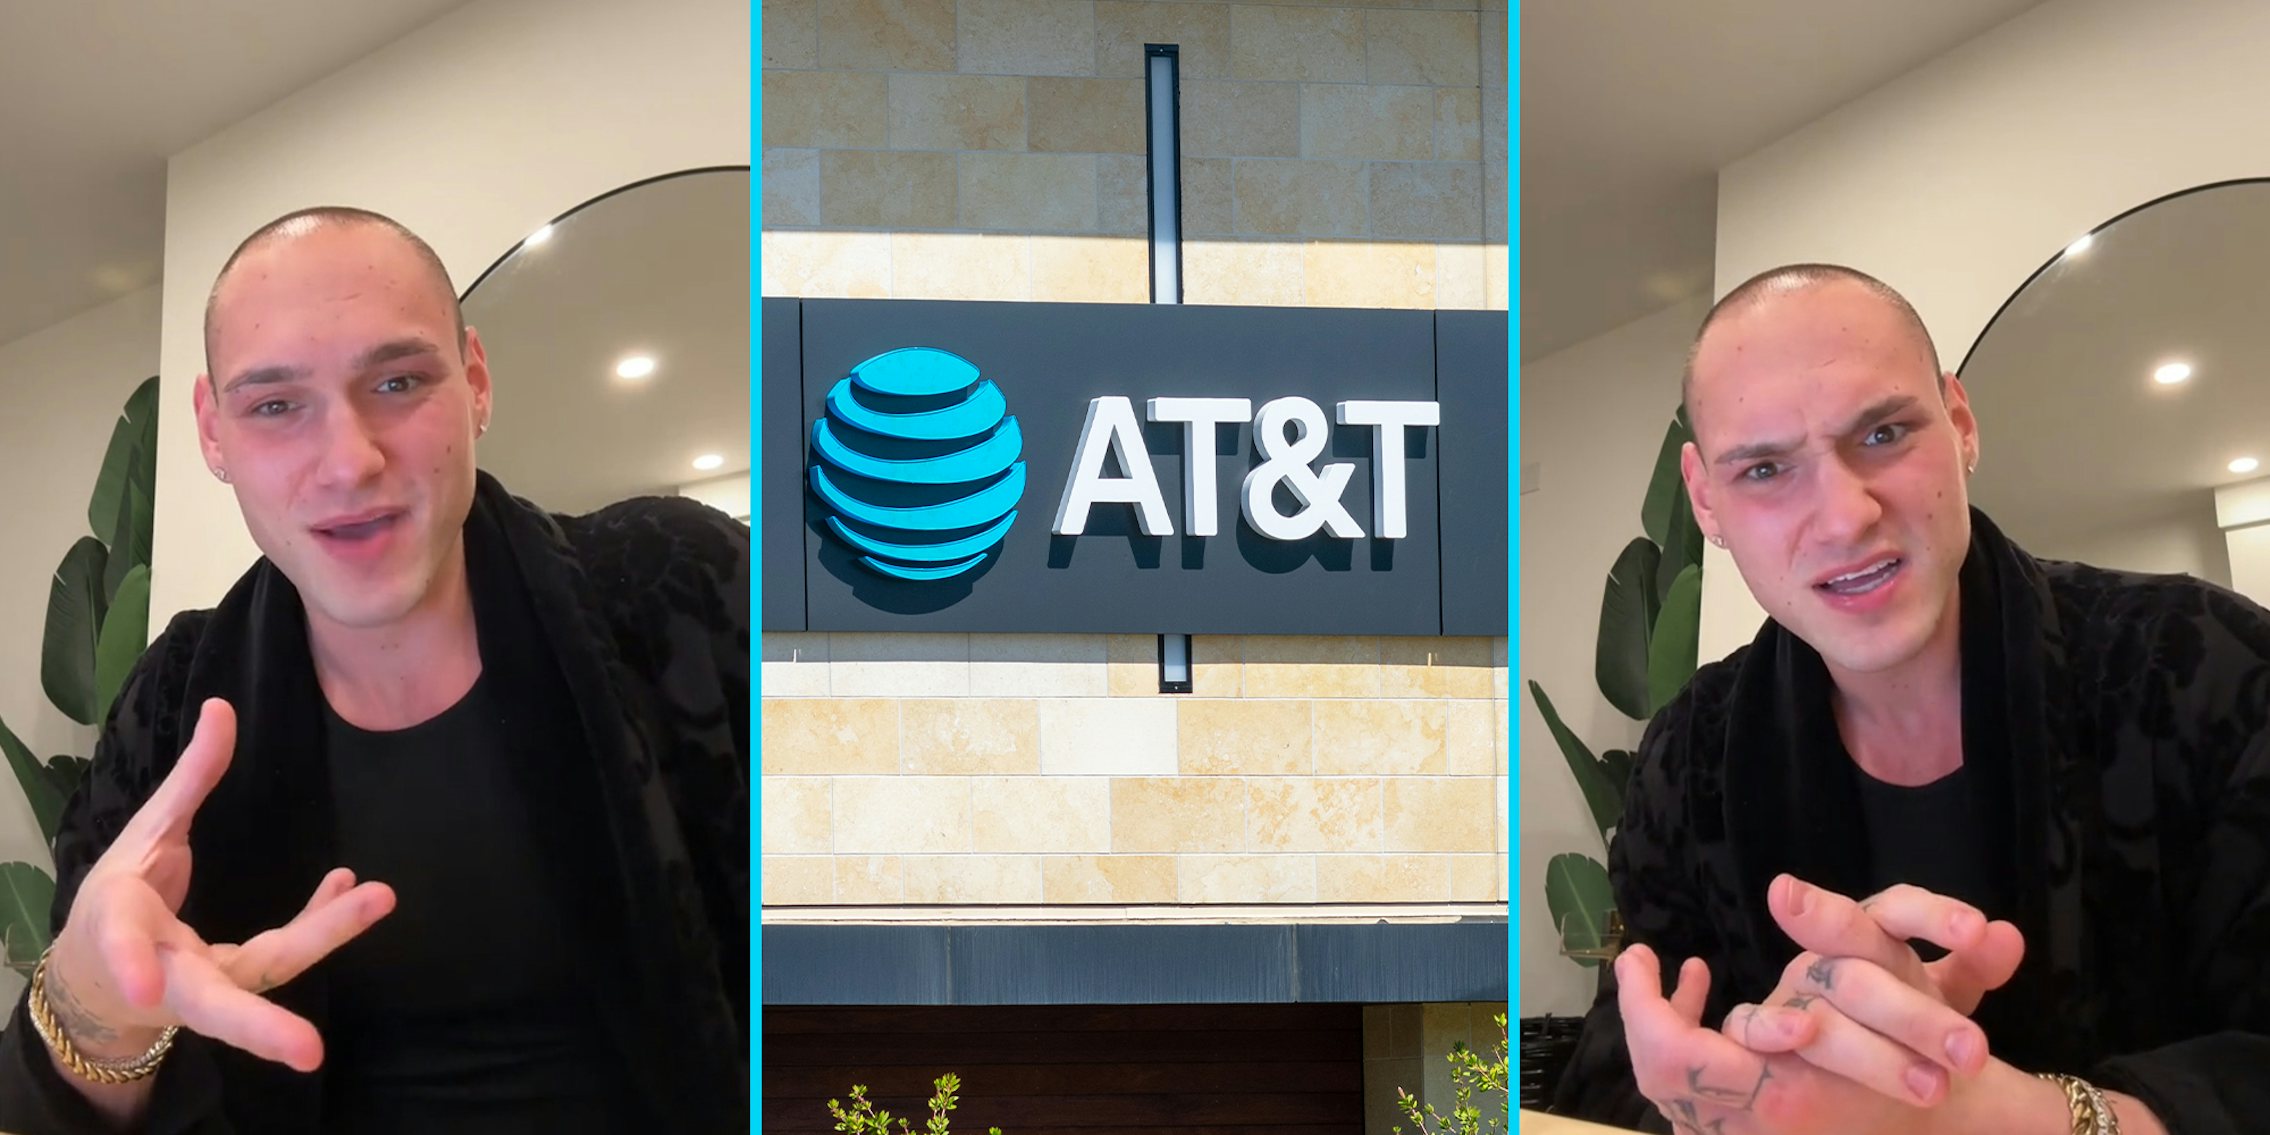 AT&T Wi-Fi Scam - customer upgrades for 'double the speed' gets bamboozled